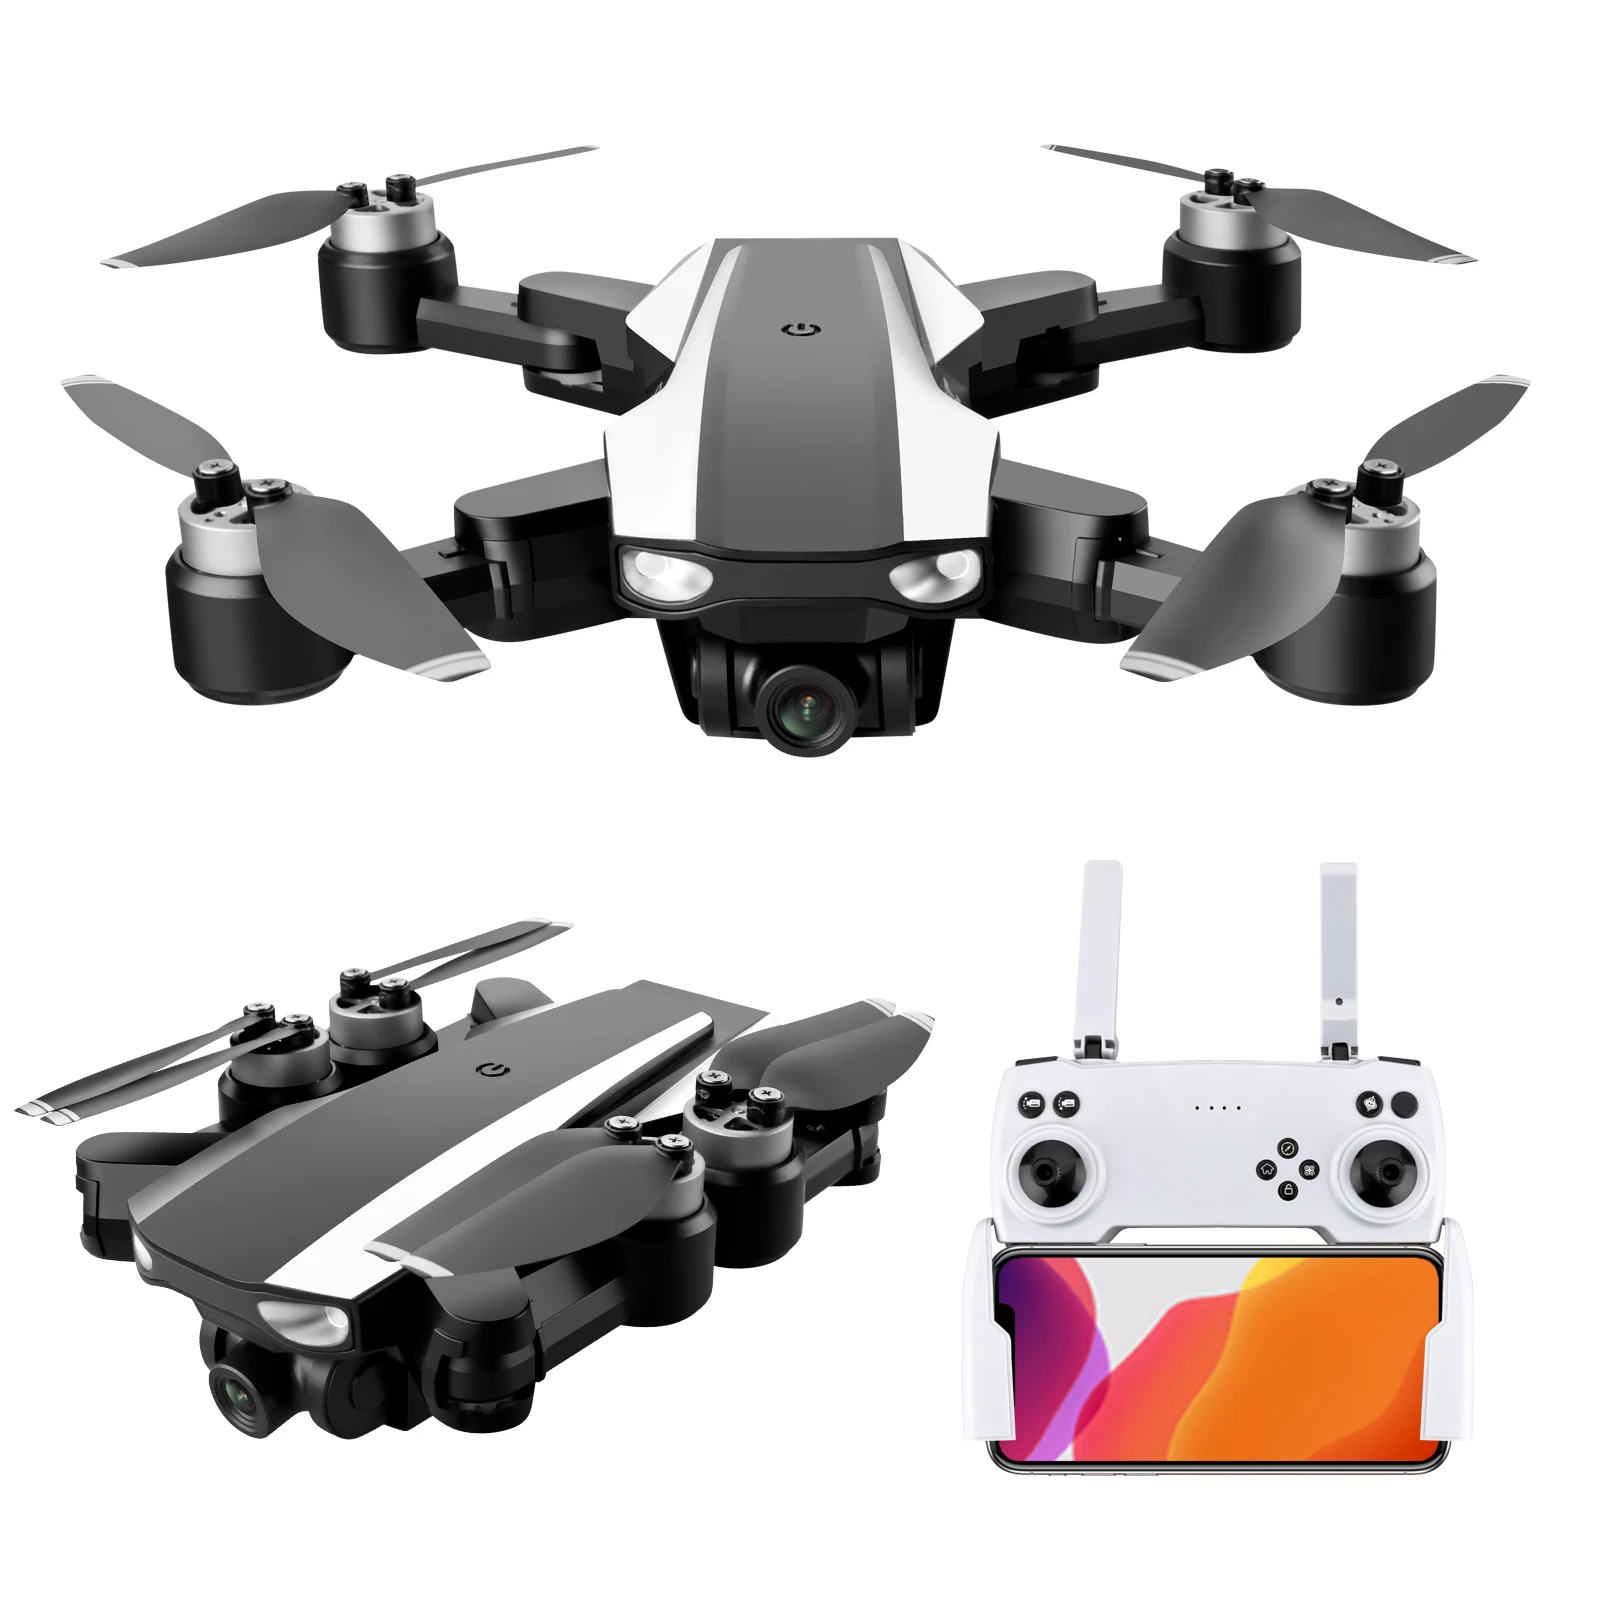 

S105 Drone 4K Hd Profesional Gps Quadcopter Dual Camera Wifi Fpv Foldable Brushless Motor Drones RC Helicopter Toys